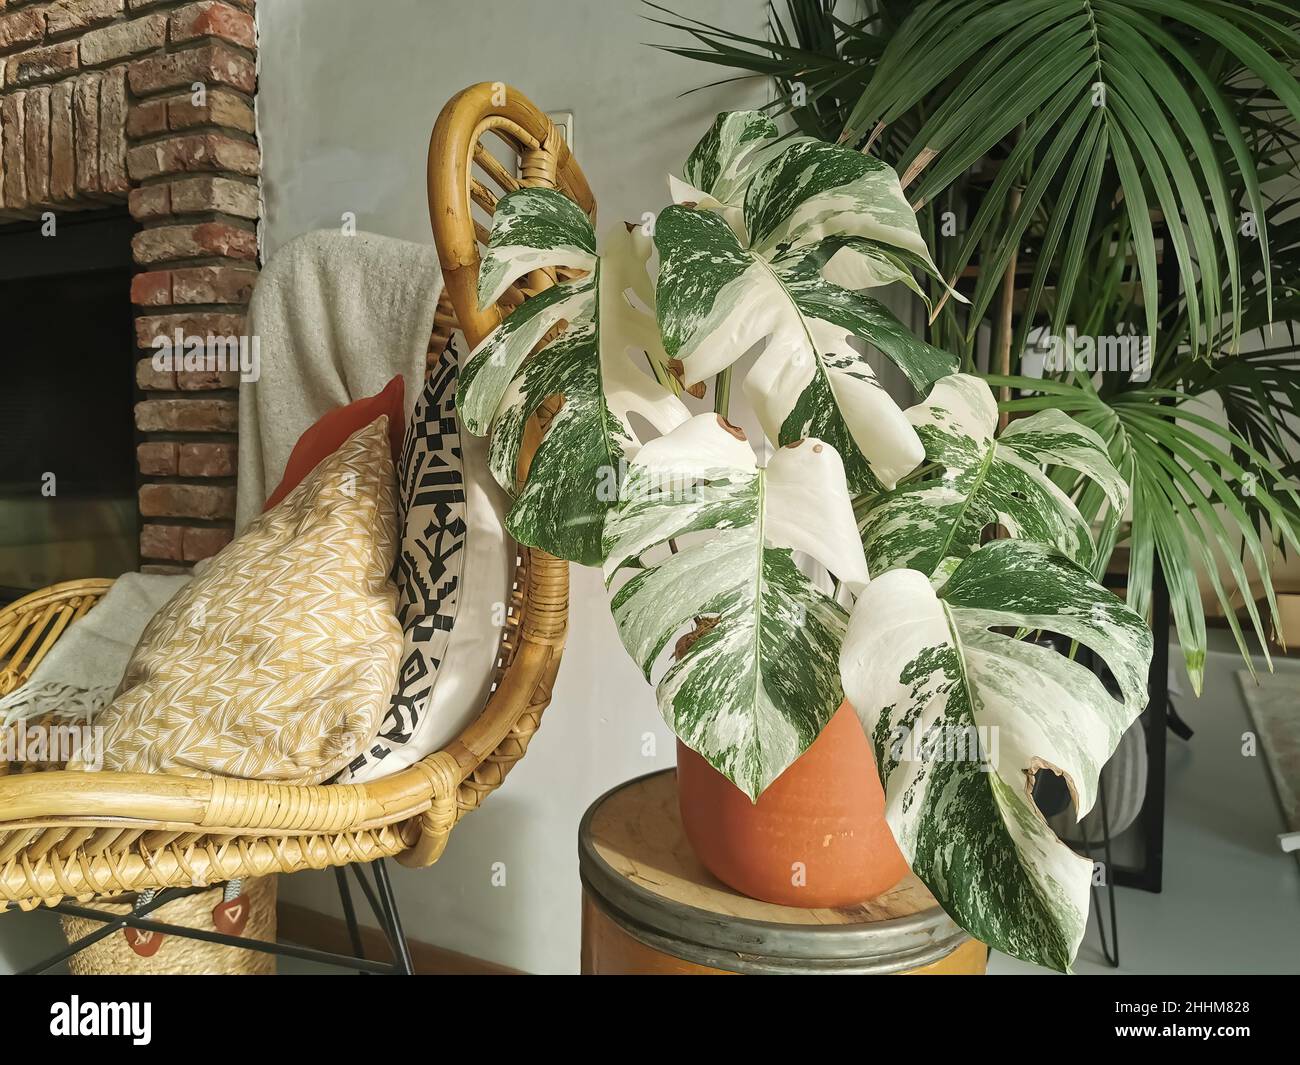 Monstera albo borsigiana or variegated monstera houseplant. Highly variegated full plant in an urban jungle interior. Expensive and rare plant. Stock Photo